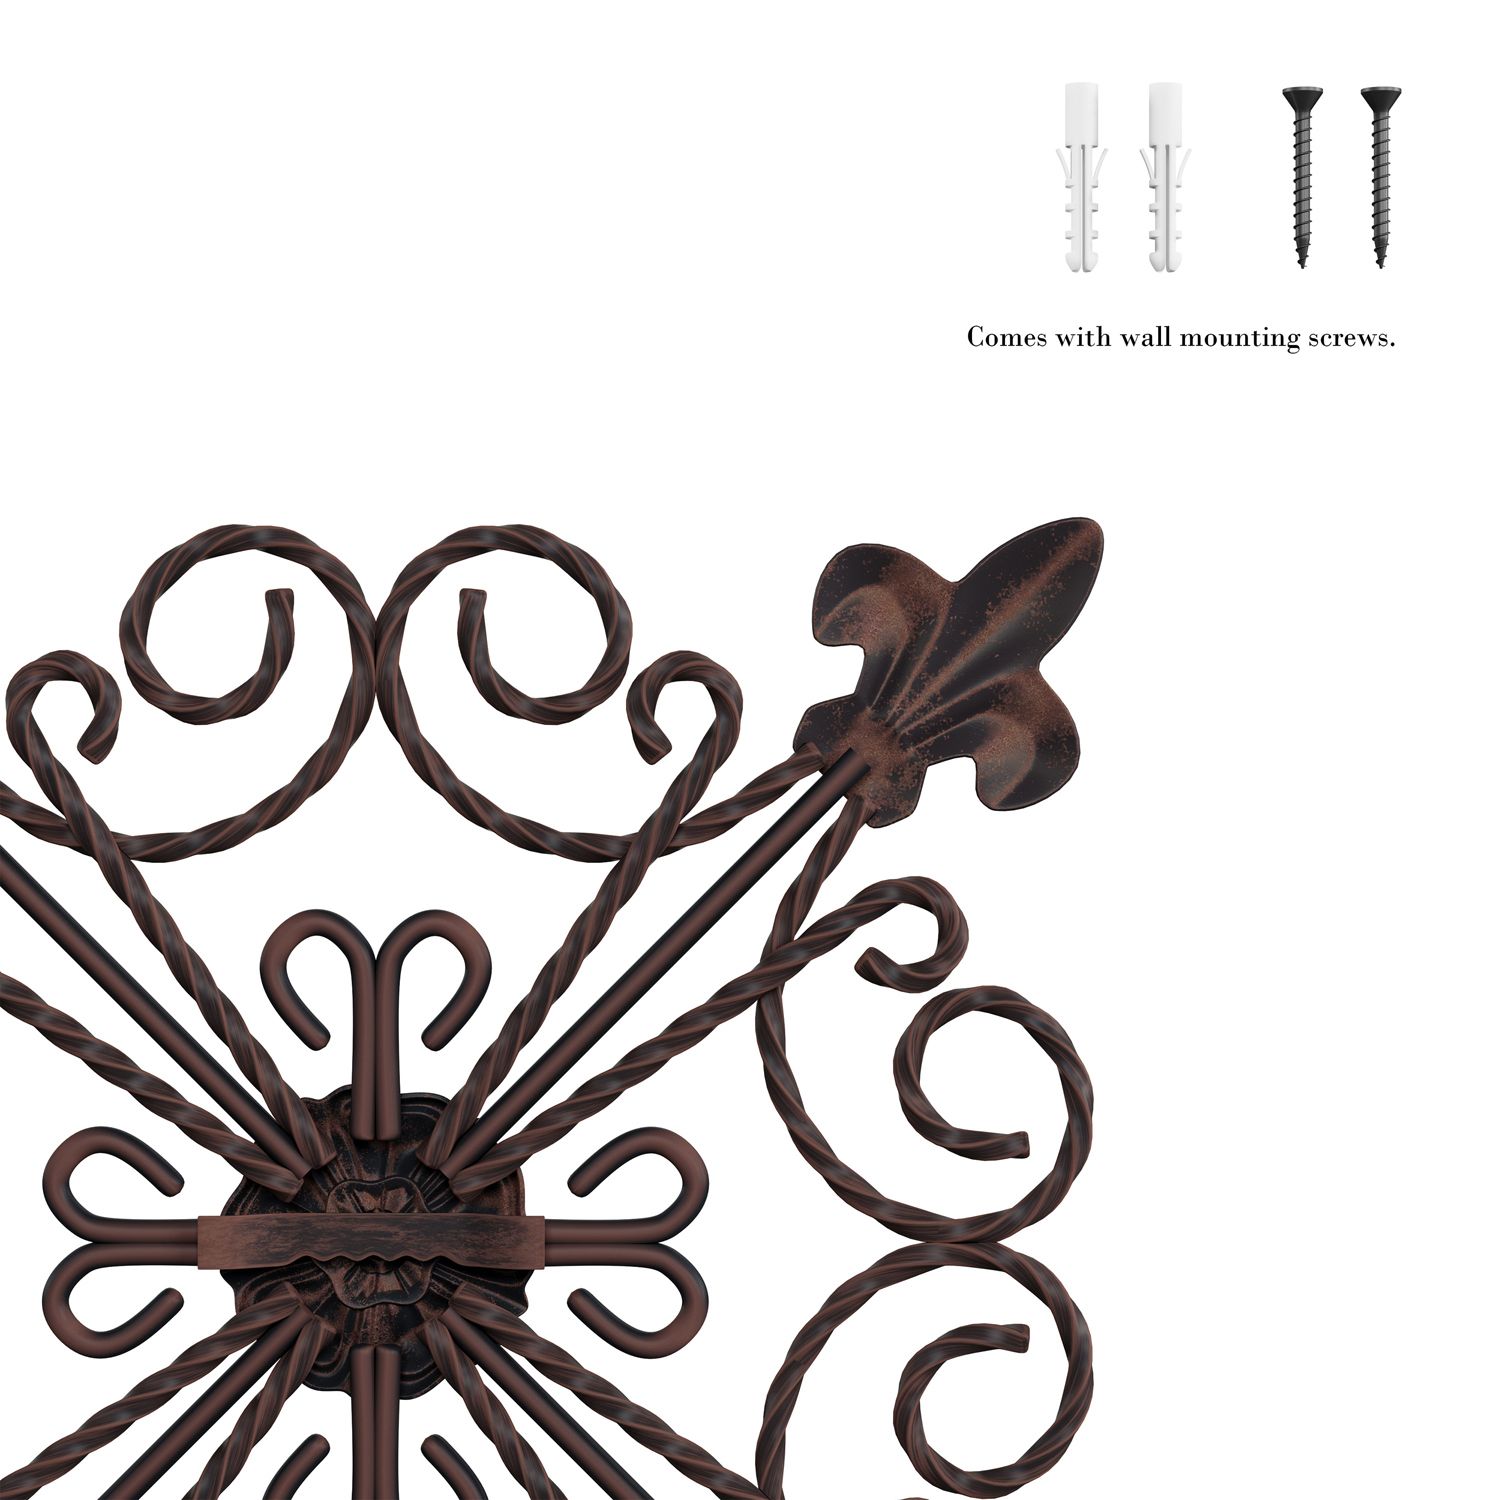 Medallion Square 8" Metal Wall Art – Pier1 With Best And Newest Square Bronze Metal Wall Art (View 10 of 20)